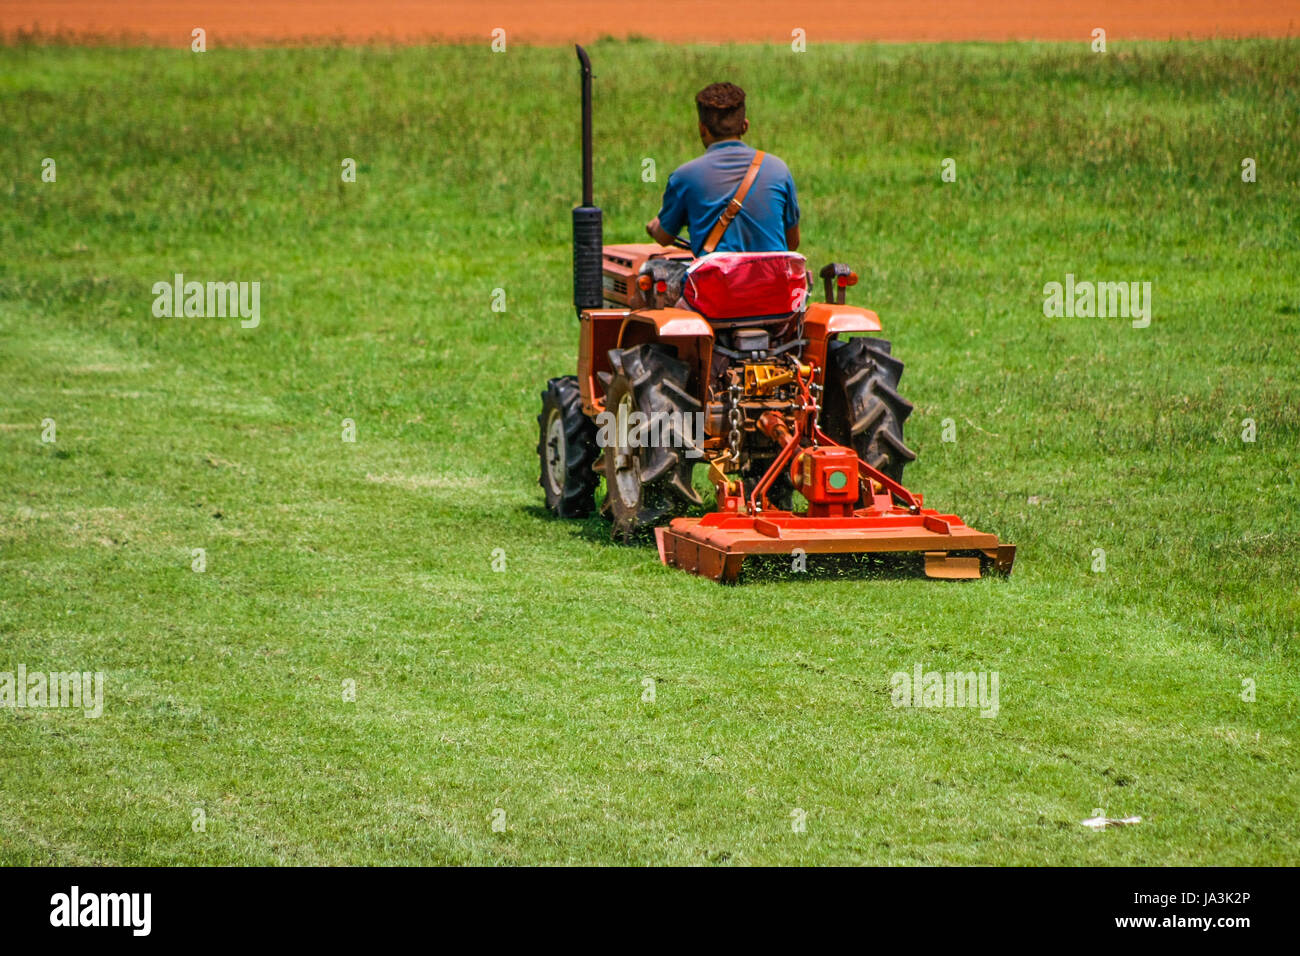 a man on mower cutting grass in football field Stock Photo